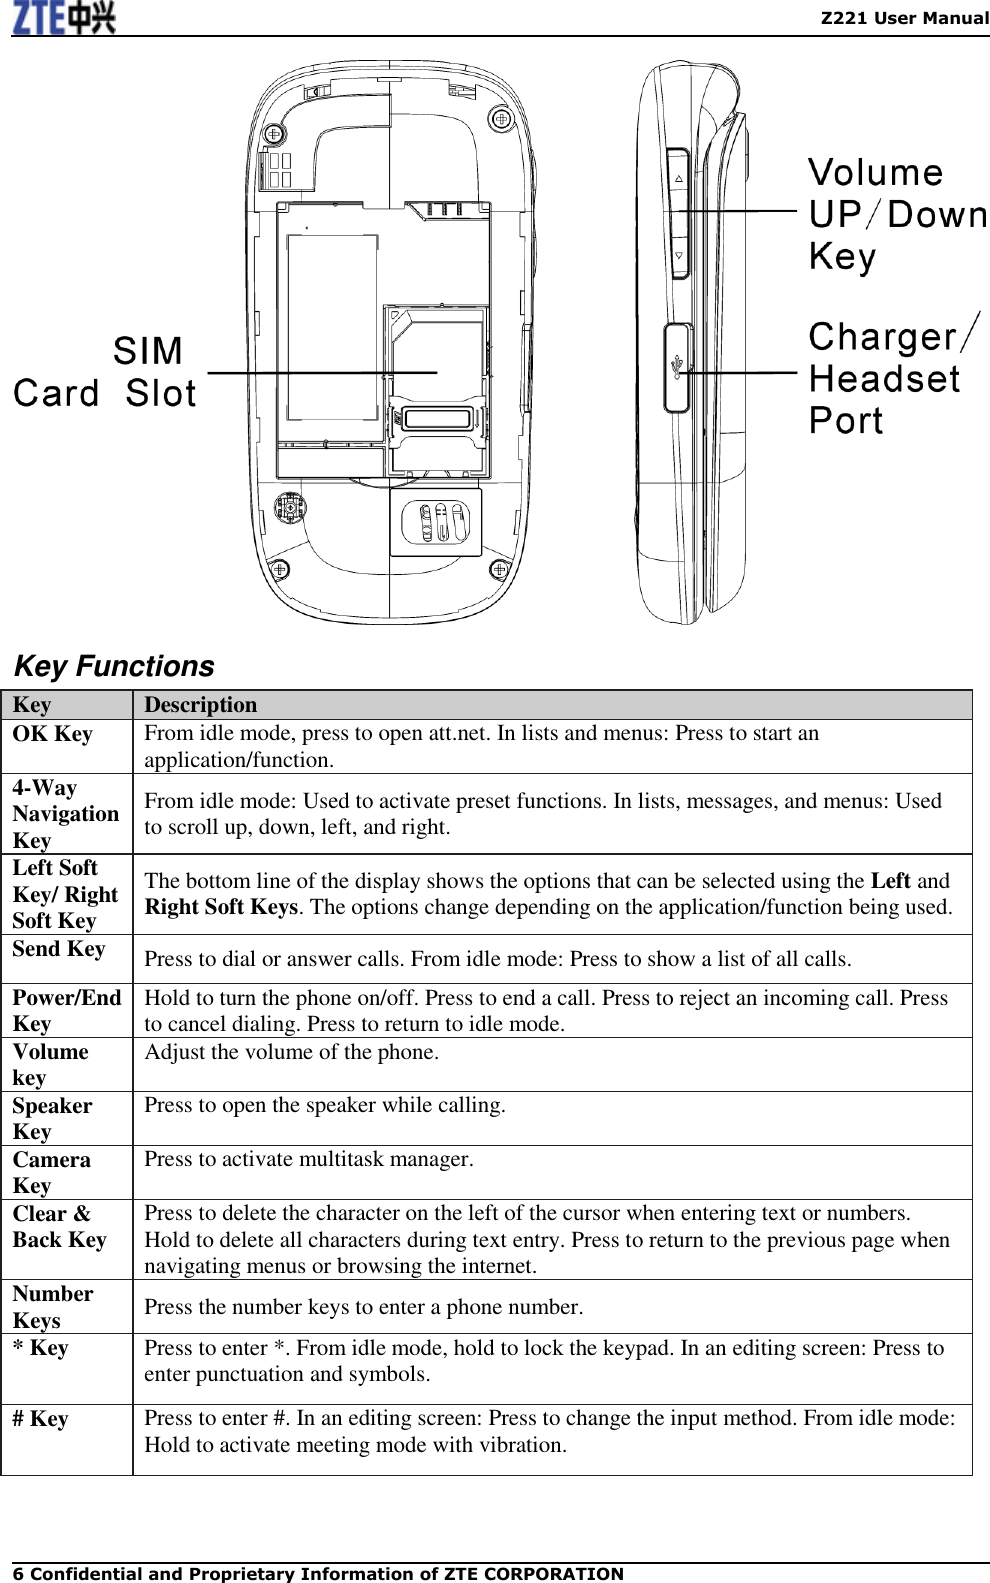    Z221 User Manual 6 Confidential and Proprietary Information of ZTE CORPORATION  Key Functions Key   Description   OK Key   From idle mode, press to open att.net. In lists and menus: Press to start an application/function. 4-Way Navigation Key   From idle mode: Used to activate preset functions. In lists, messages, and menus: Used to scroll up, down, left, and right.   Left Soft Key/ Right Soft Key   The bottom line of the display shows the options that can be selected using the Left and Right Soft Keys. The options change depending on the application/function being used.   Send Key   Press to dial or answer calls. From idle mode: Press to show a list of all calls.   Power/End Key   Hold to turn the phone on/off. Press to end a call. Press to reject an incoming call. Press to cancel dialing. Press to return to idle mode. Volume key Adjust the volume of the phone. Speaker Key Press to open the speaker while calling. Camera Key   Press to activate multitask manager.   Clear &amp; Back Key   Press to delete the character on the left of the cursor when entering text or numbers. Hold to delete all characters during text entry. Press to return to the previous page when navigating menus or browsing the internet. Number Keys   Press the number keys to enter a phone number.   * Key   Press to enter *. From idle mode, hold to lock the keypad. In an editing screen: Press to enter punctuation and symbols.   # Key   Press to enter #. In an editing screen: Press to change the input method. From idle mode: Hold to activate meeting mode with vibration.    